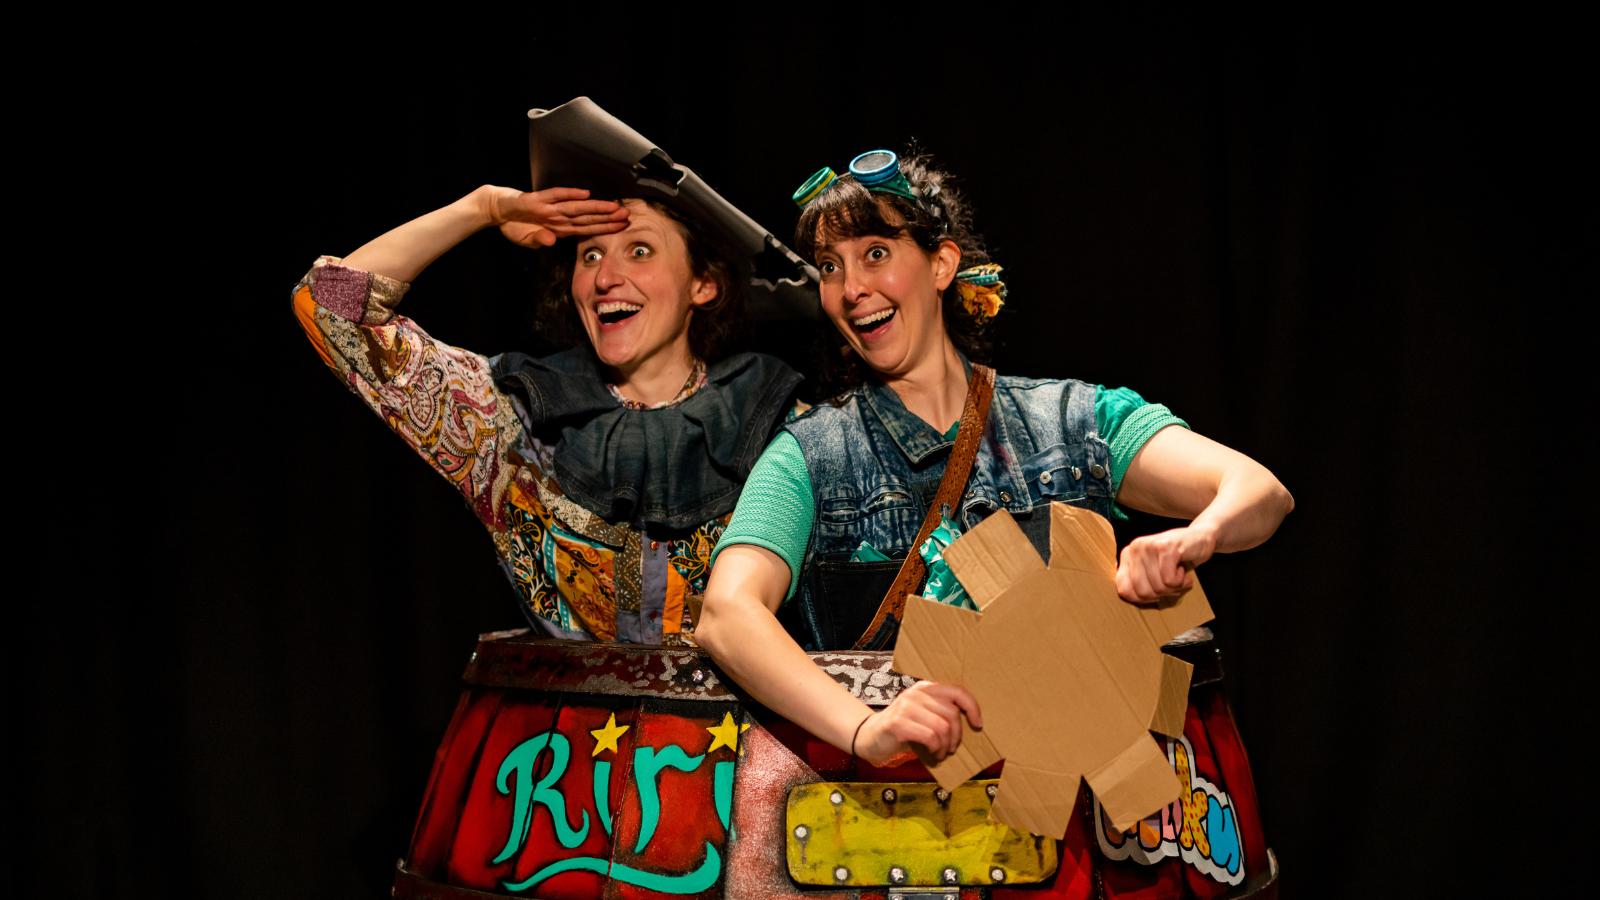 Two performers stand on stage. They look as though they are pirates, with one holding her hand up to her face as though she is looking towards land